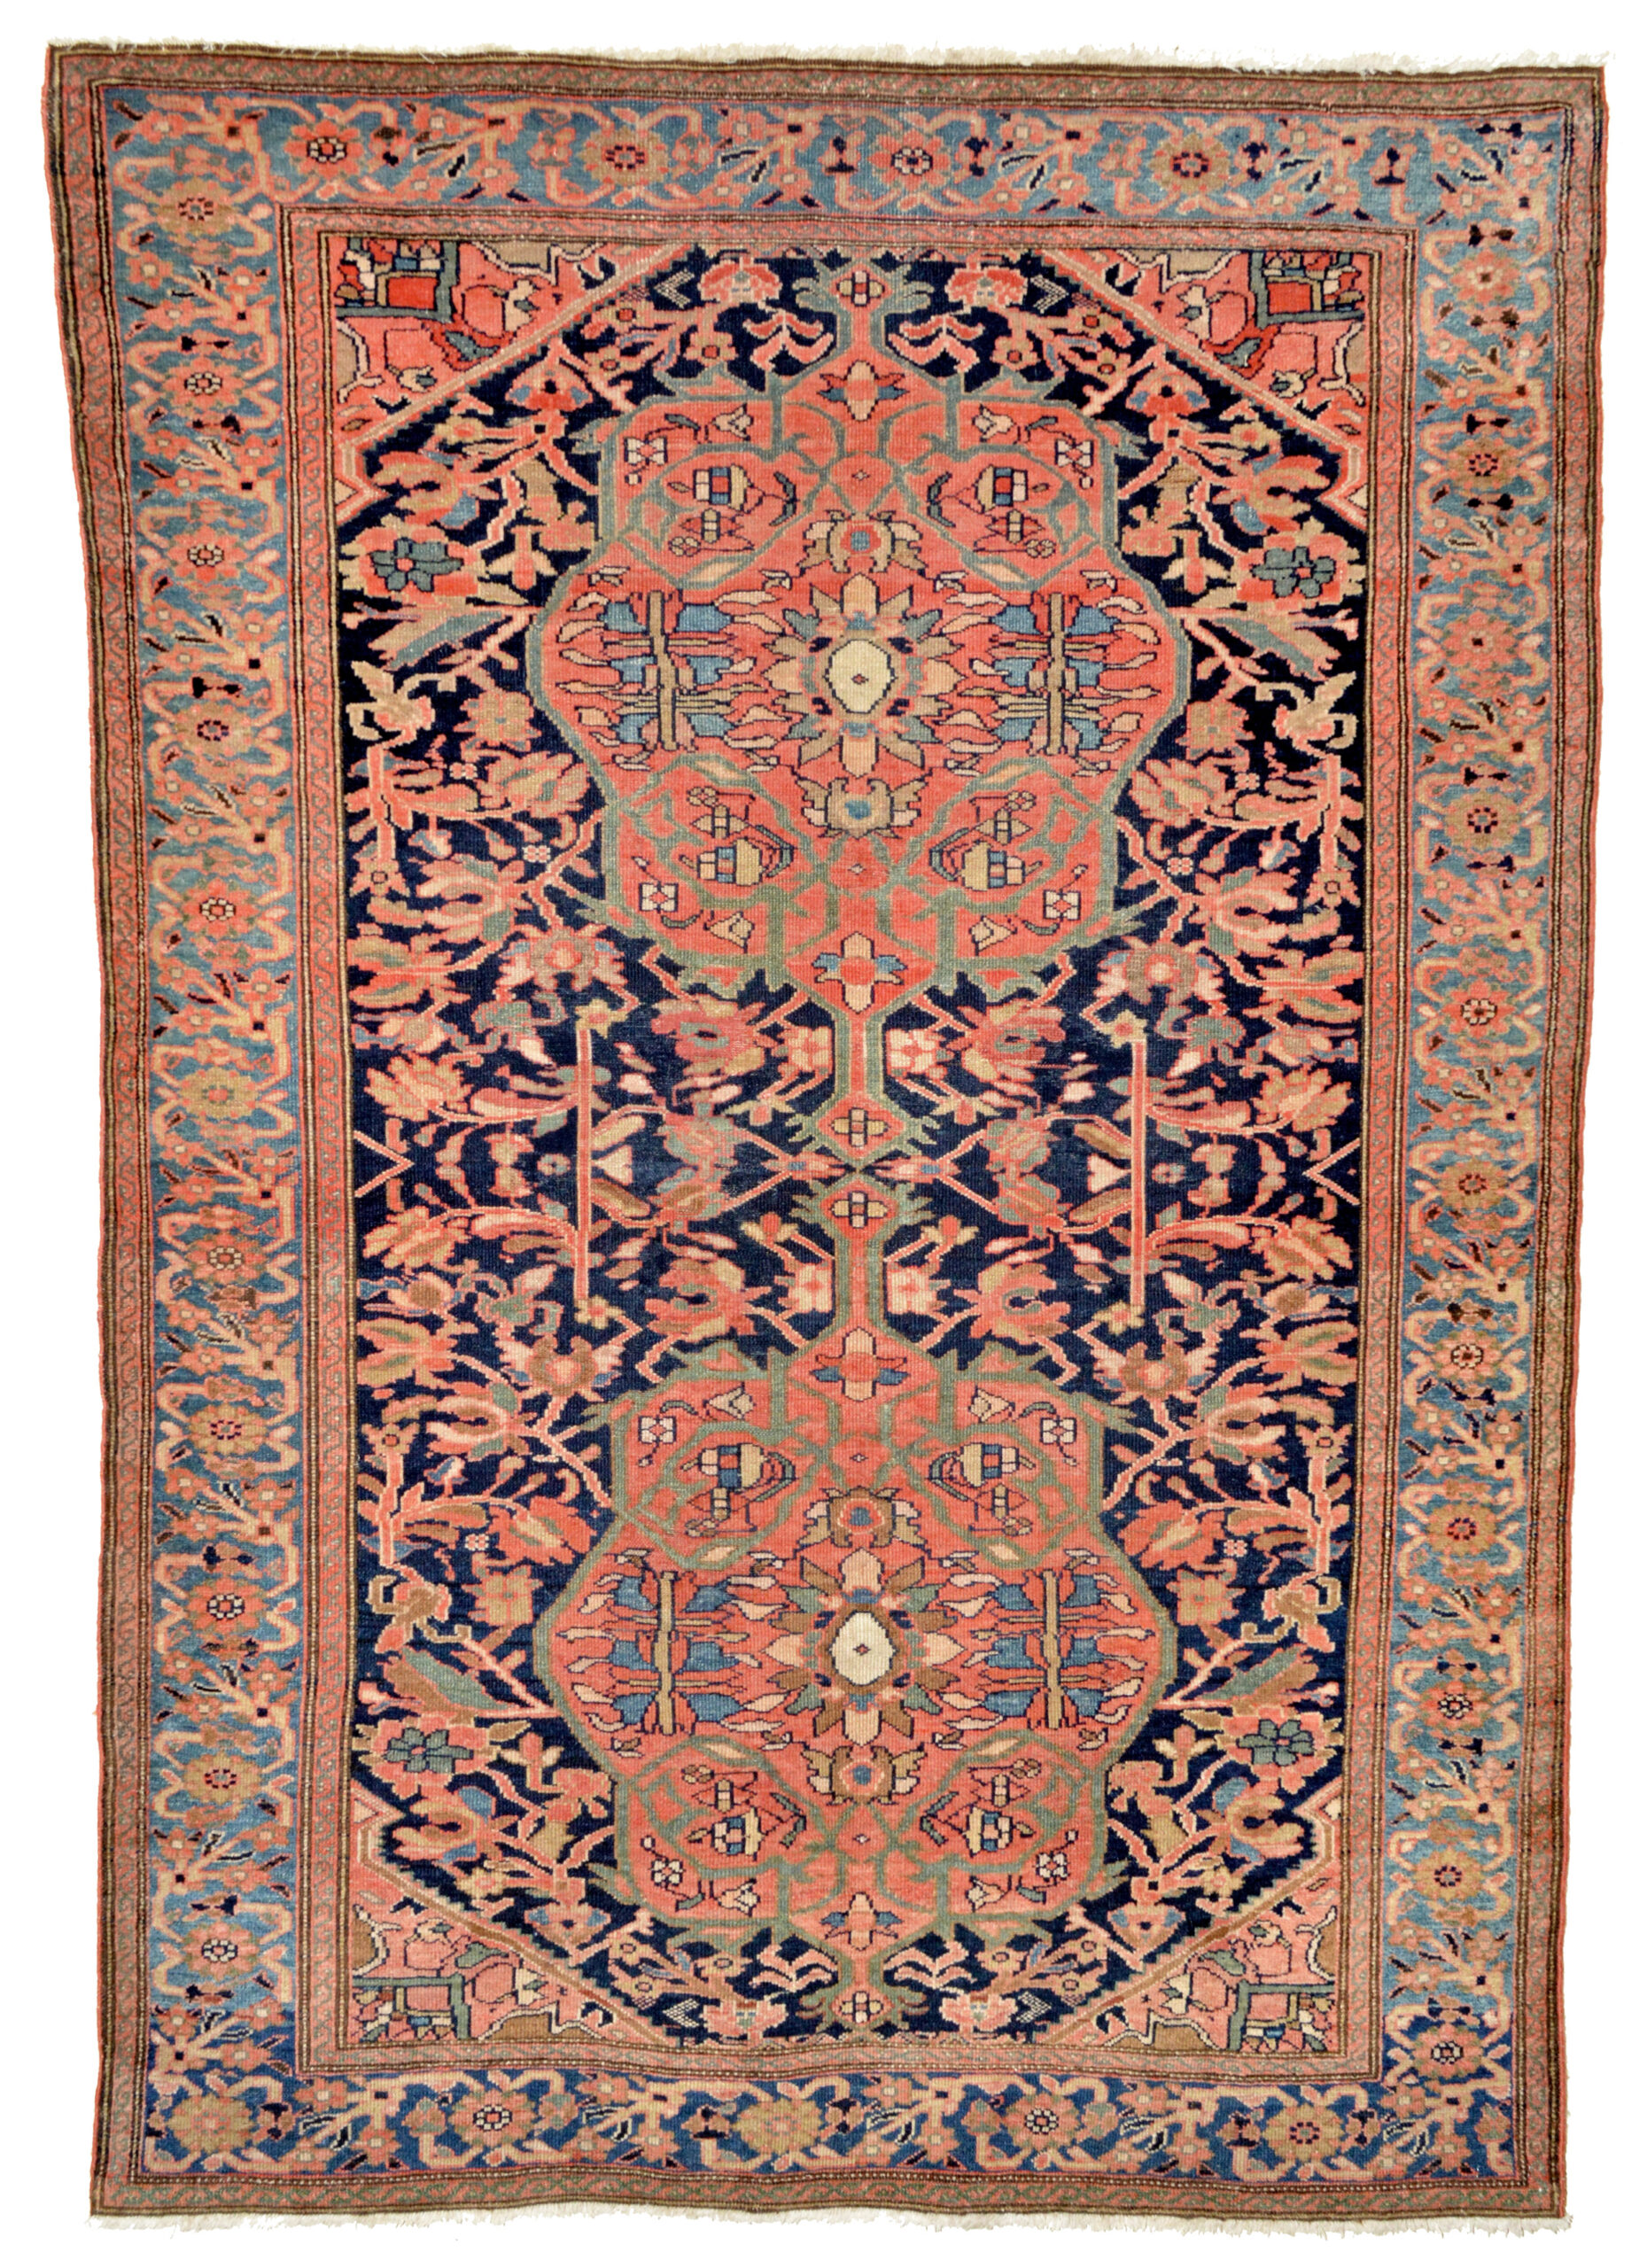 Antique Persian Melayer rug with stylized floral motifs on a navy field that contains two coral color medallions and is framed by a light blue border, west Persia, Circa 1900. Douglas Stock Gallery is one of the Boston area's most selective dealers in antique Persian rugs and antique Oriental rugs, antique rugs Boston Back Bay and Beacon Hill, antique rugs Brookline, antique rugs Newton, antique rugs Wellesley, antique rugs Belmont, antique rugs Concord, antique rugs West antique rugs Wellesley, antique rugs Natick,MA, antique rugs New England, antique rugs New York by appointment.